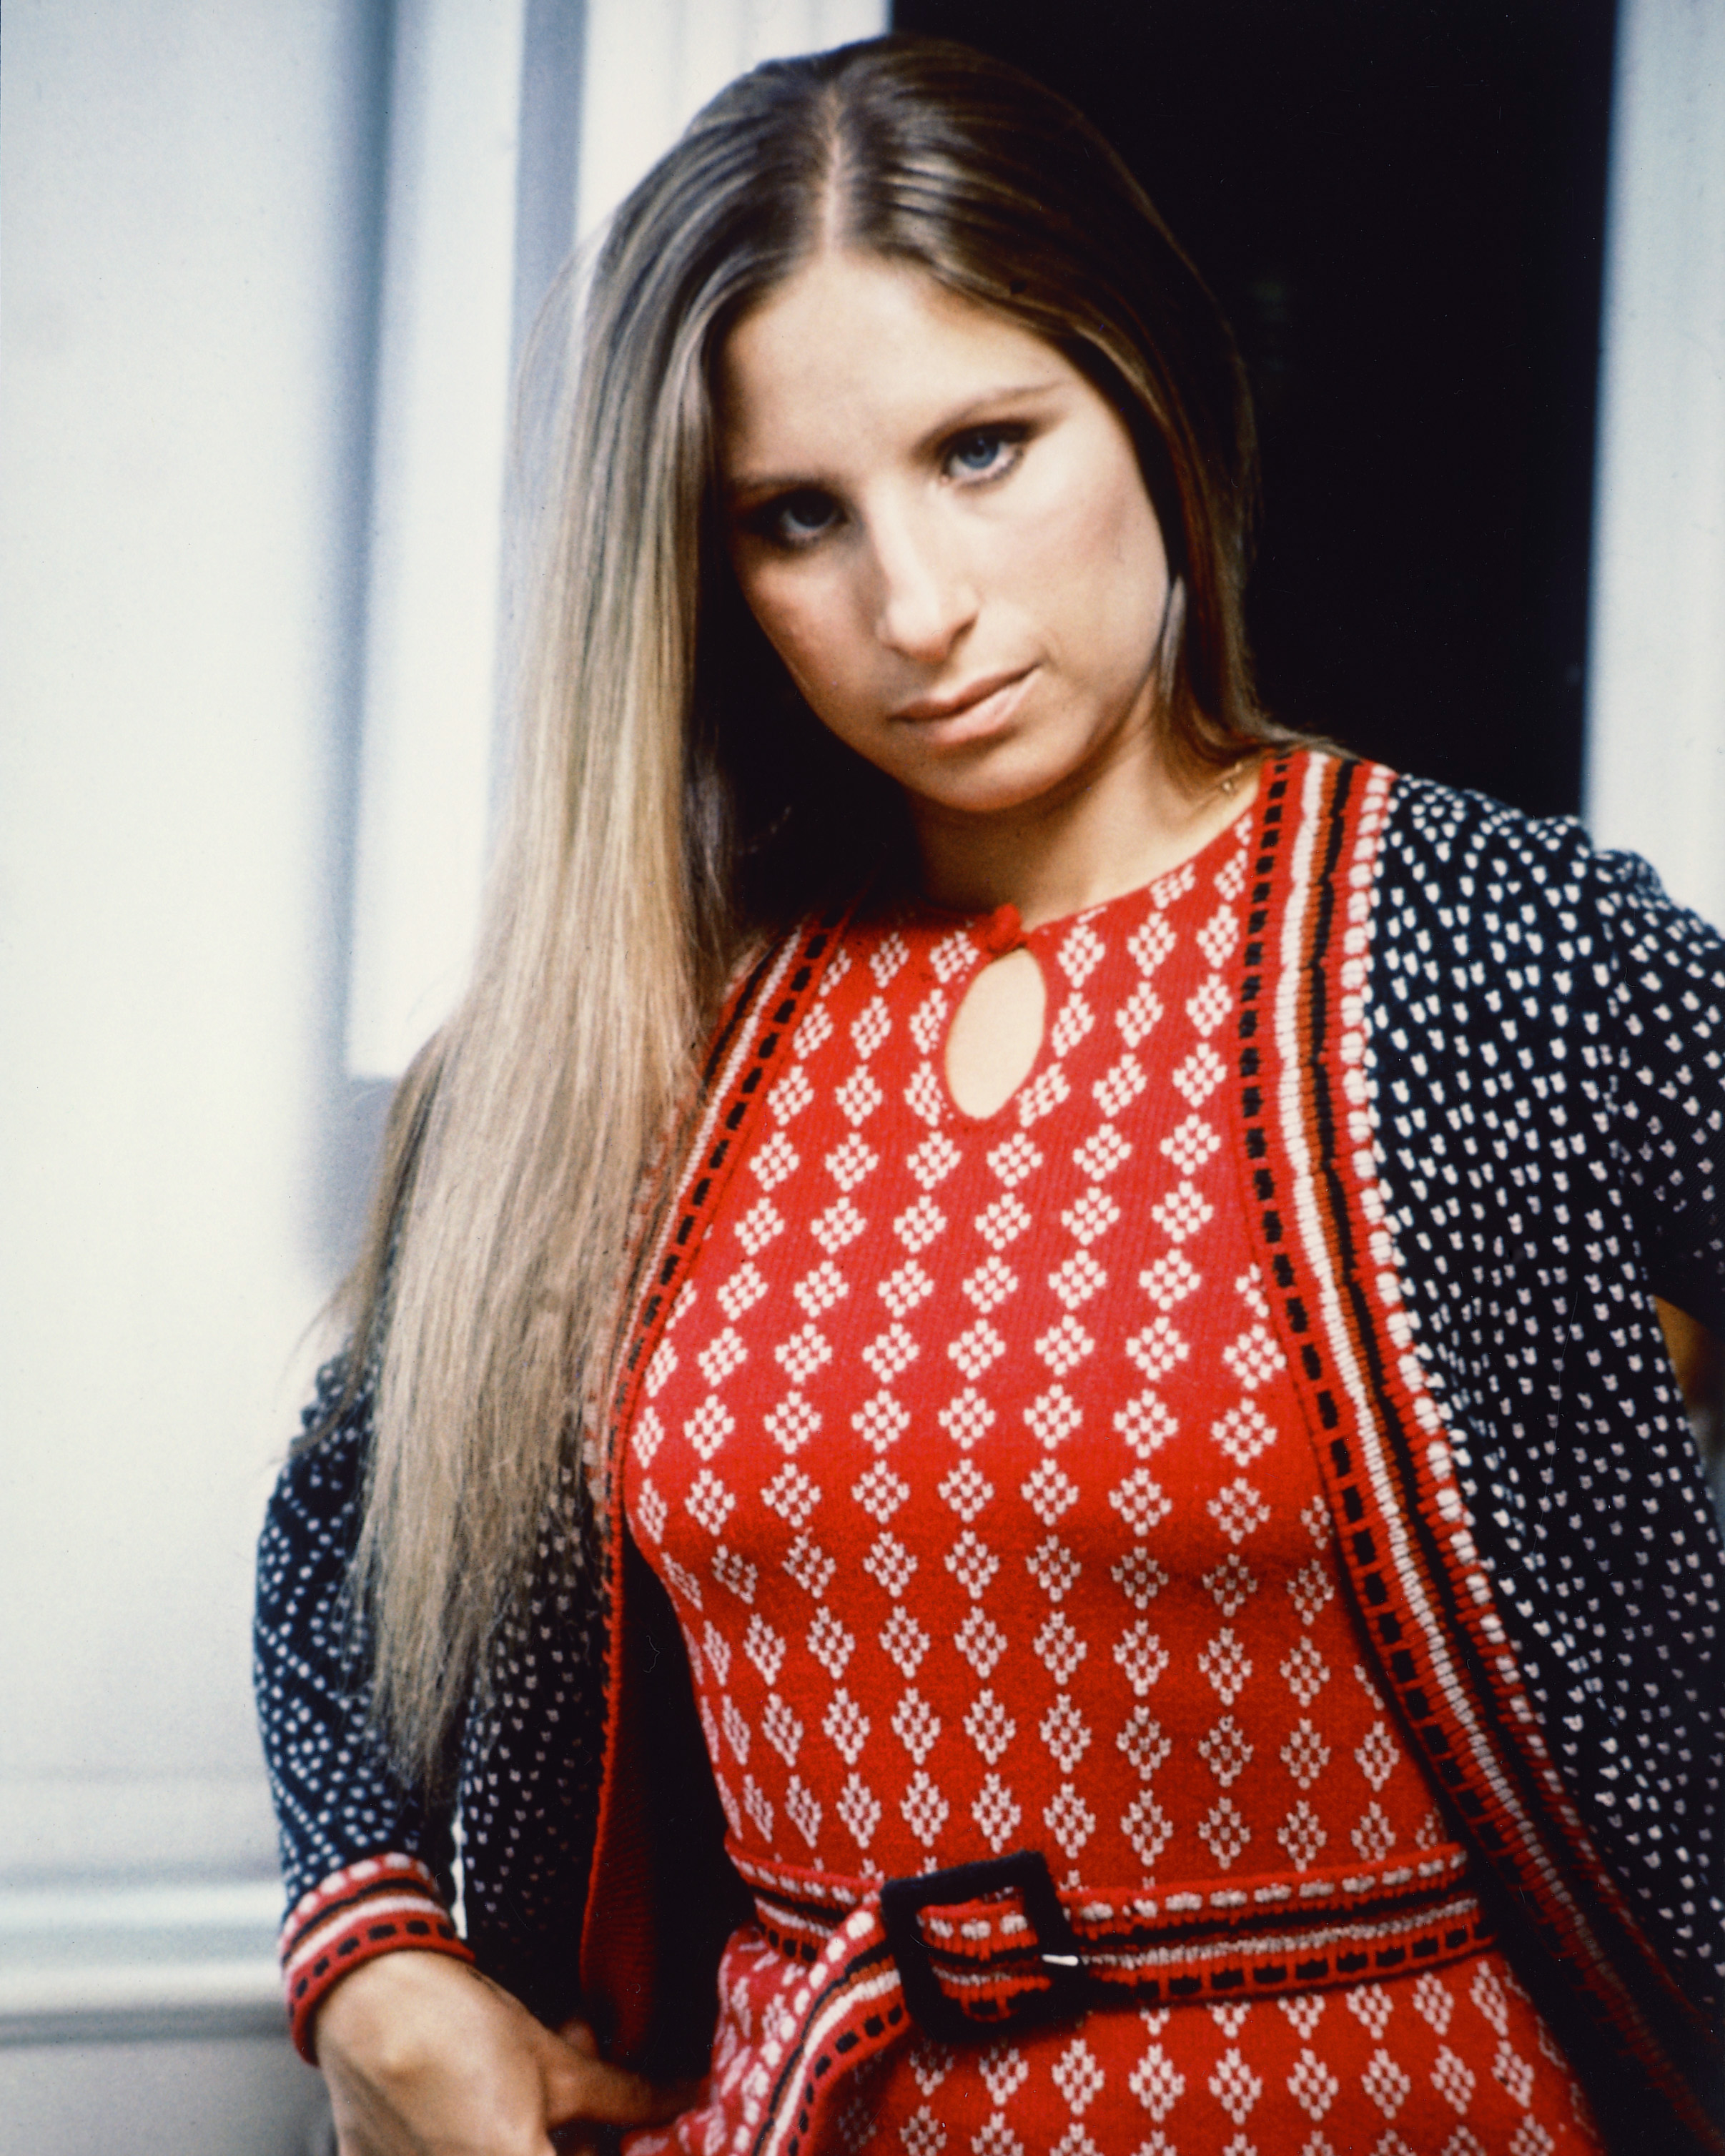 Barbra Streisand photographed in 1965 | Source: Getty Images 